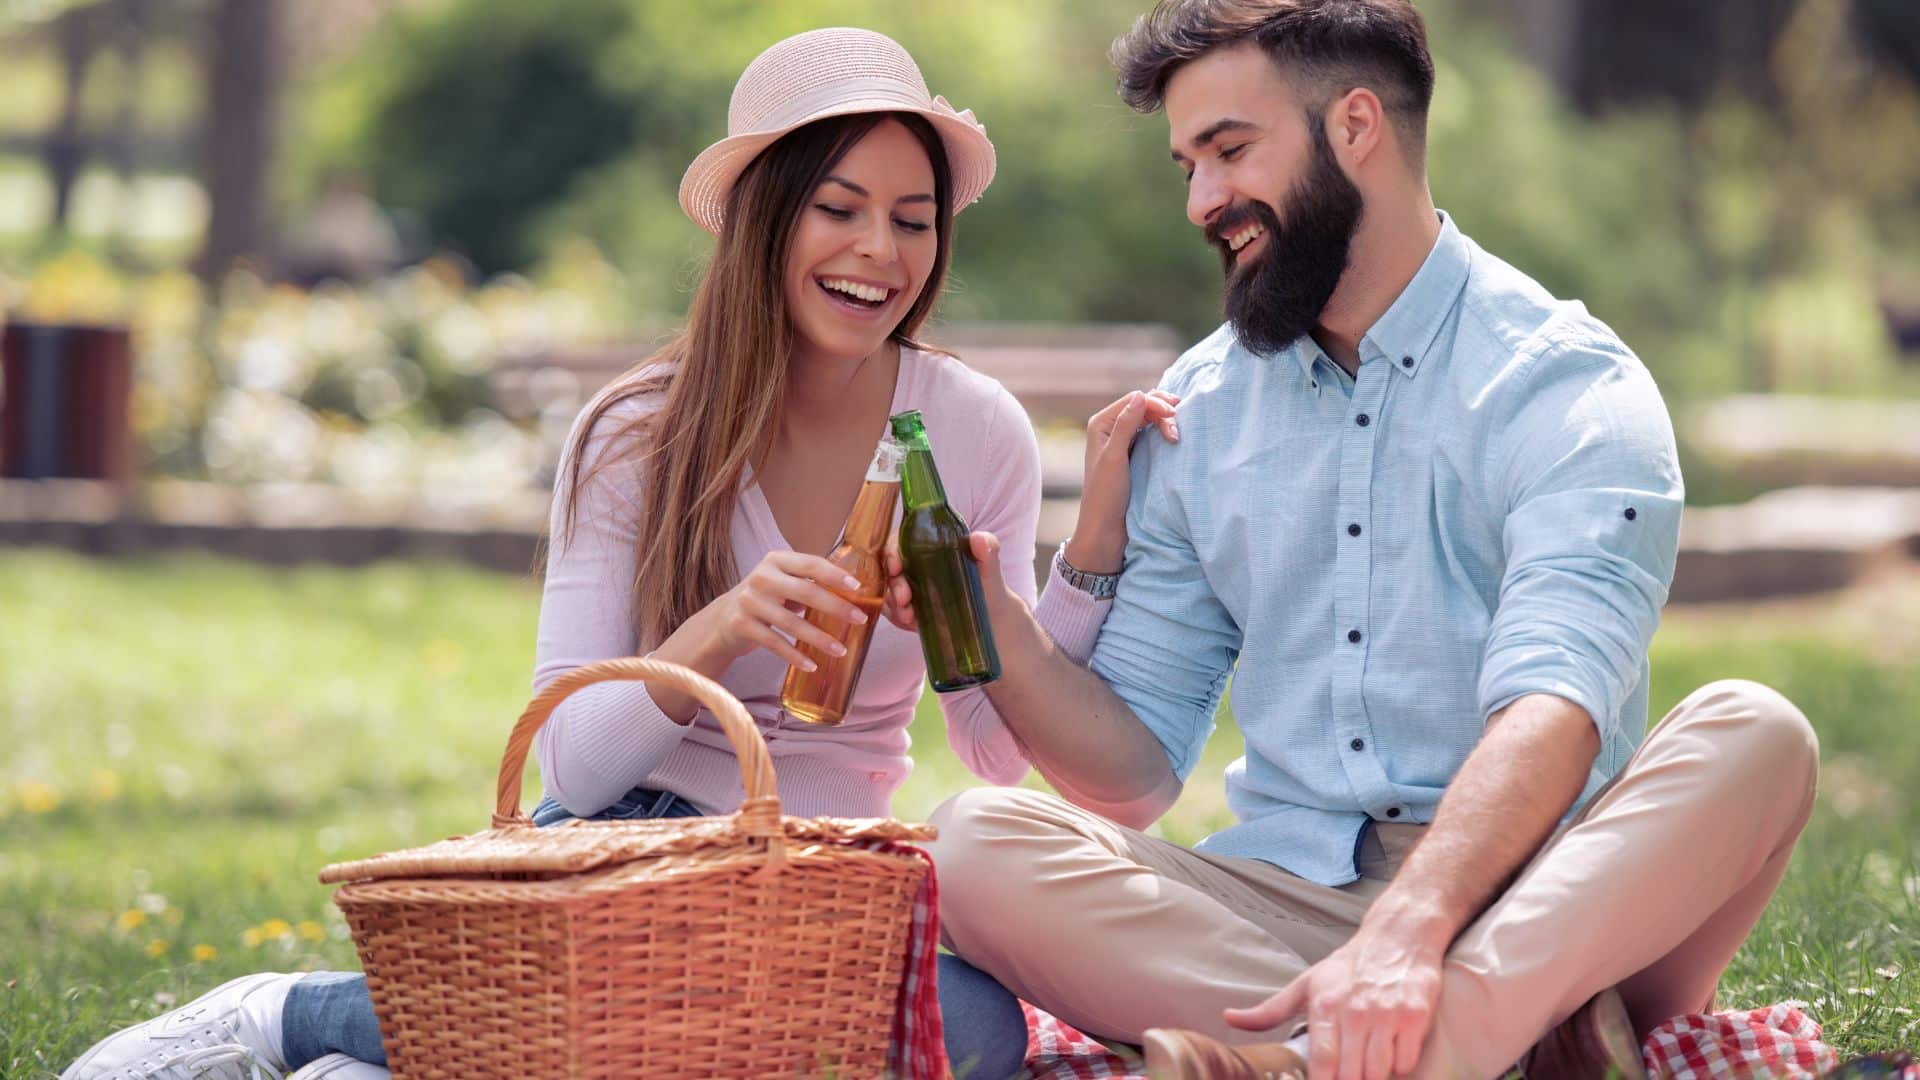 A couple drinks beer while having a picnic on a blanket outside in a park